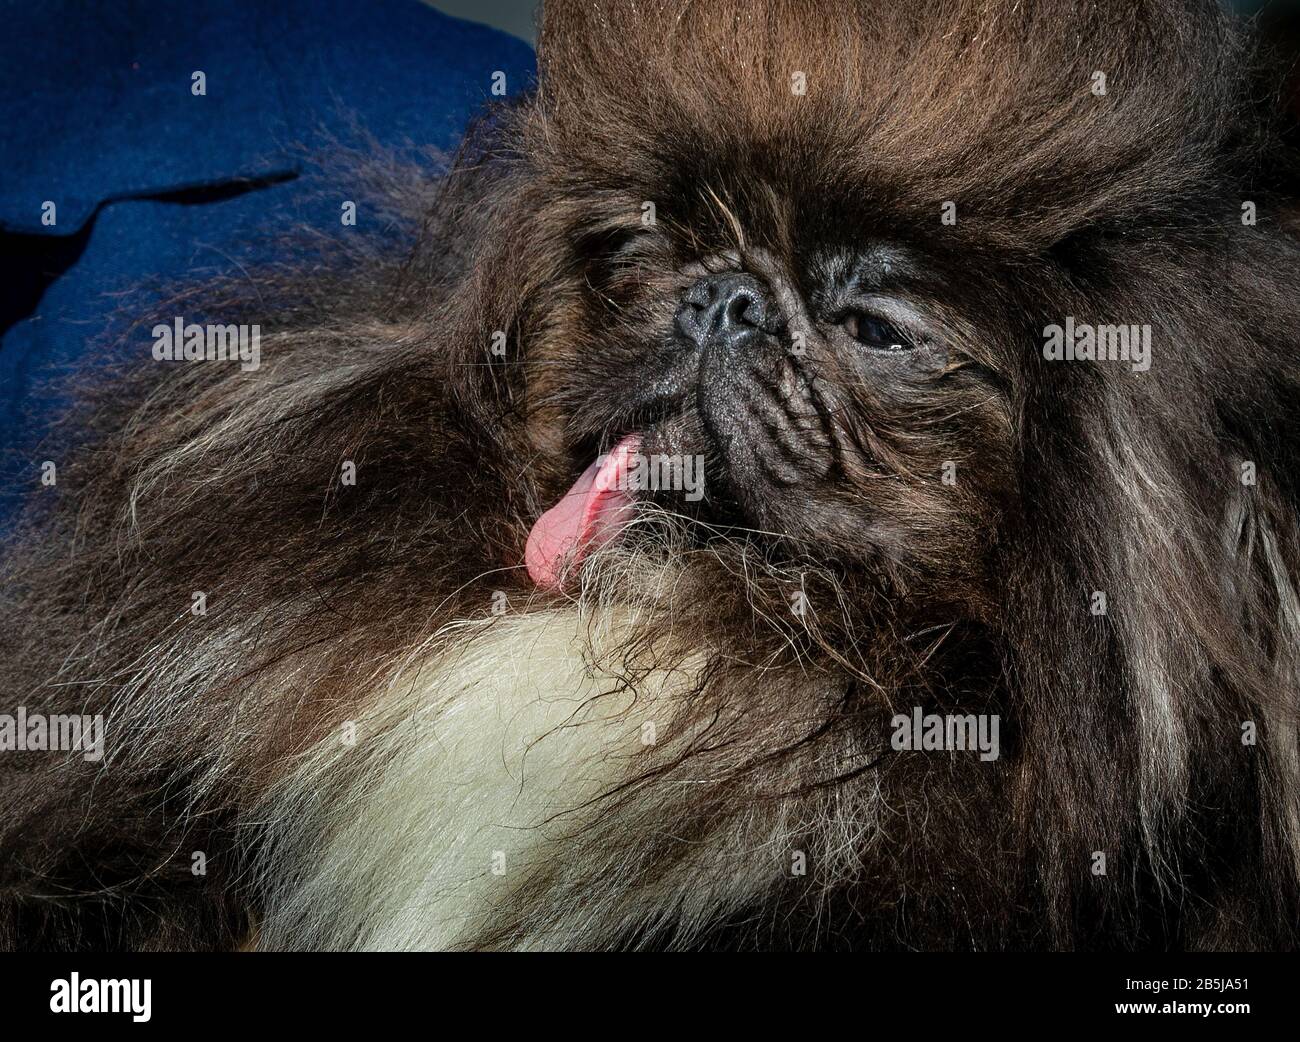 At the 2019 World’s Ugliest Dog® contest in Petaluma, California, 'Wild Thang,' a Pekinese owned by Ann Lewis of Los Angeles, took 2nd place honors. Stock Photo